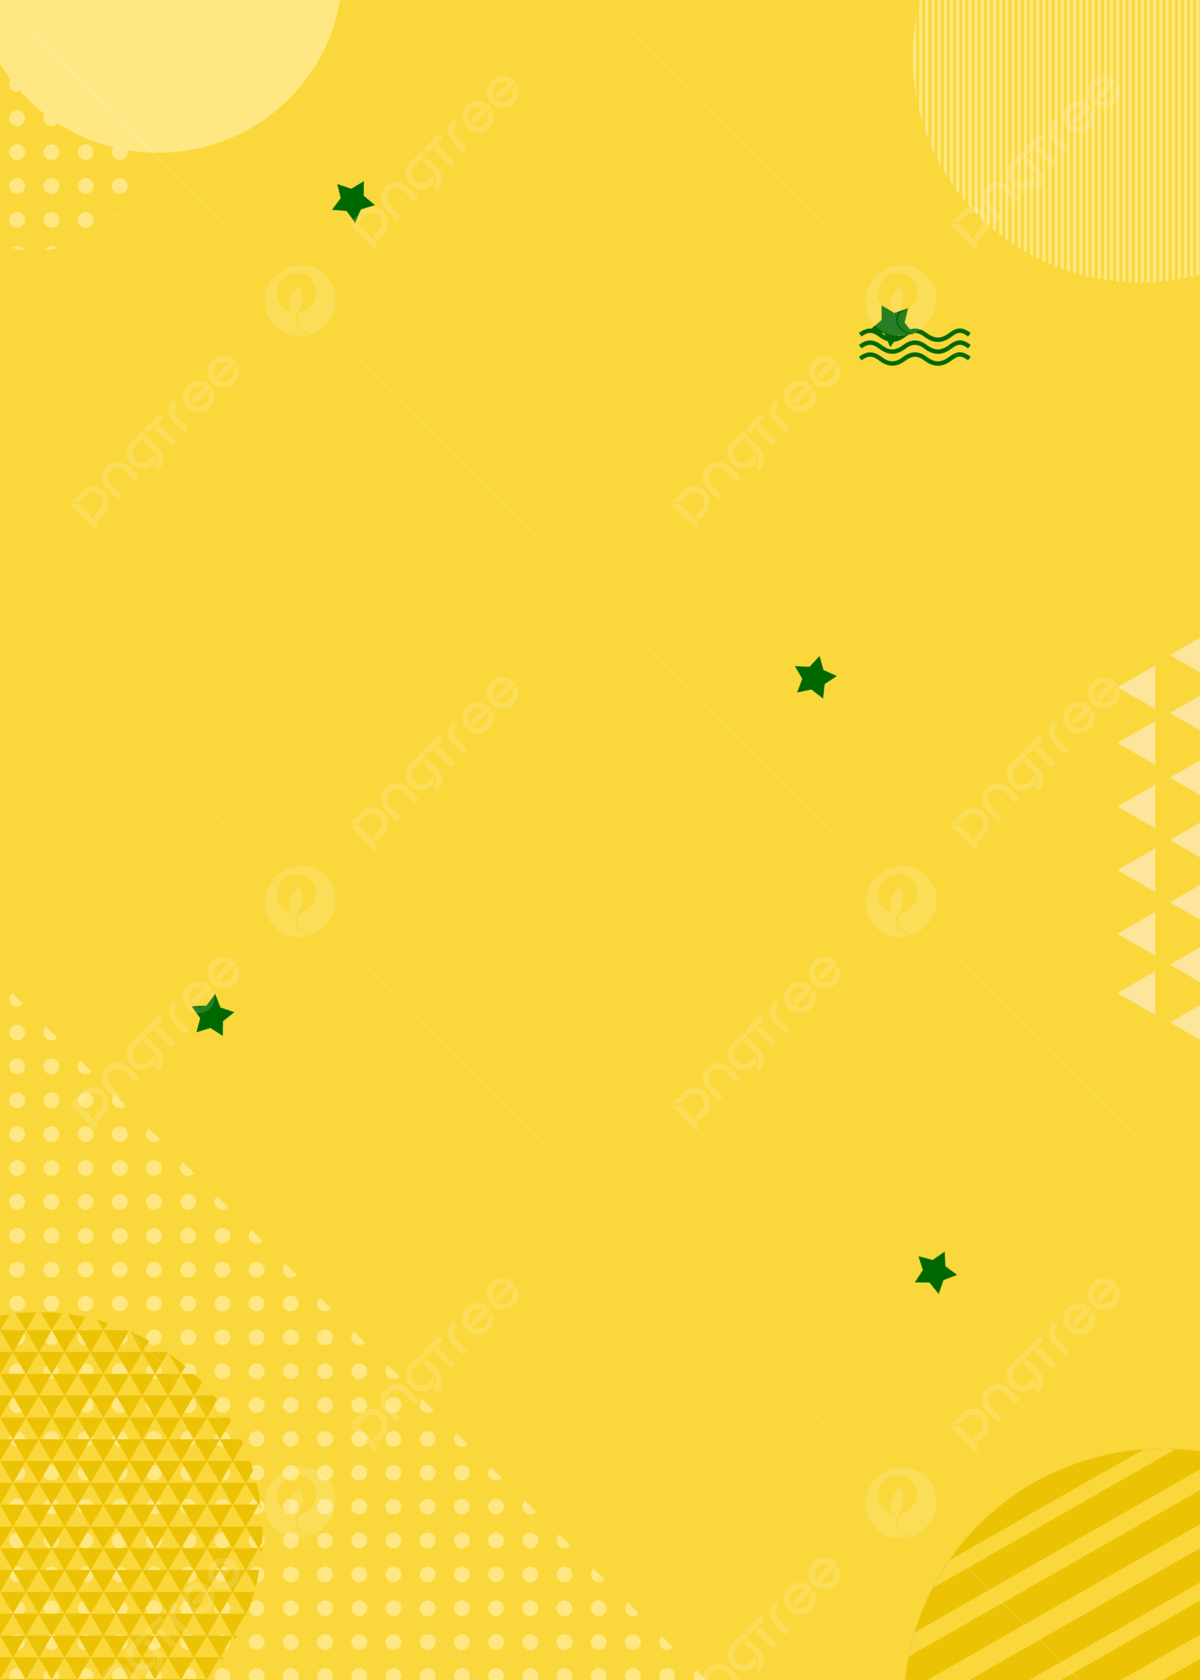 Simple background of yellow stars wallpaper image for free download